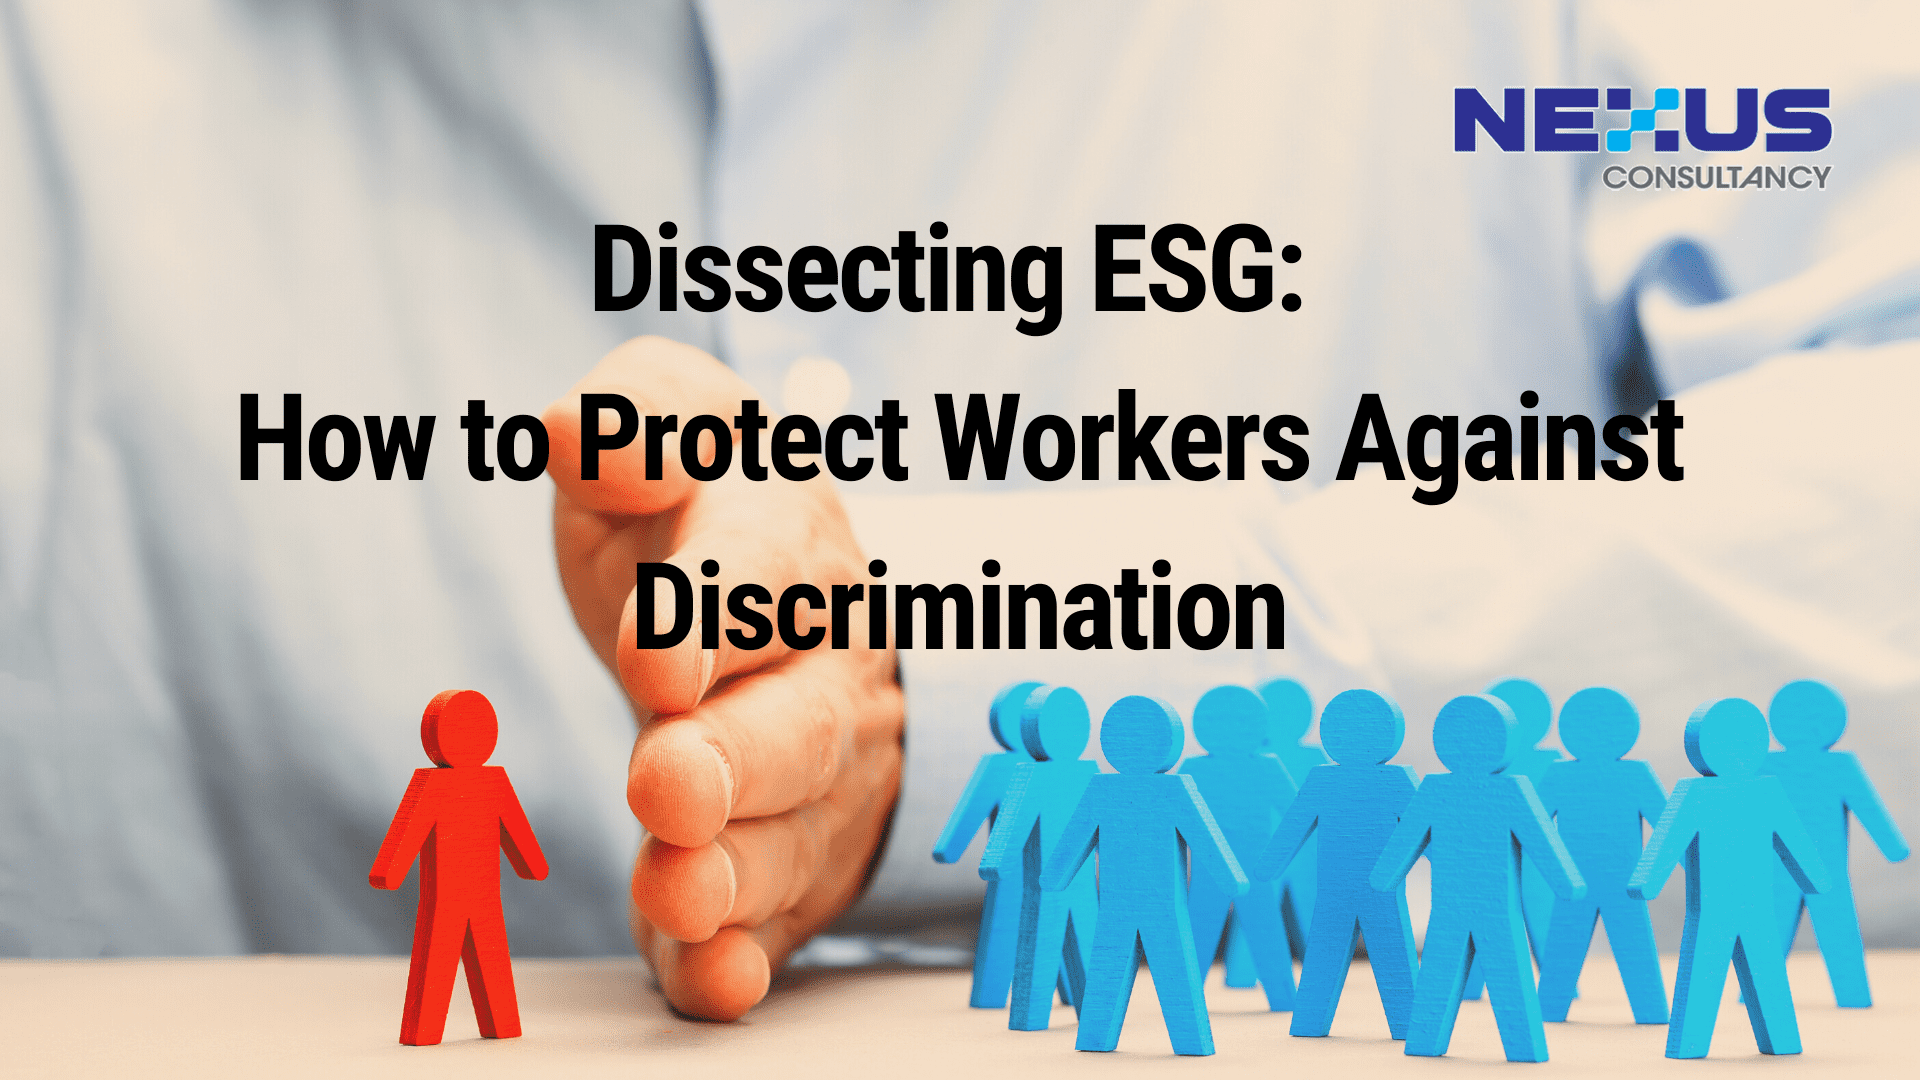 Dissecting ESG: How to Protect Workers Against Discrimination